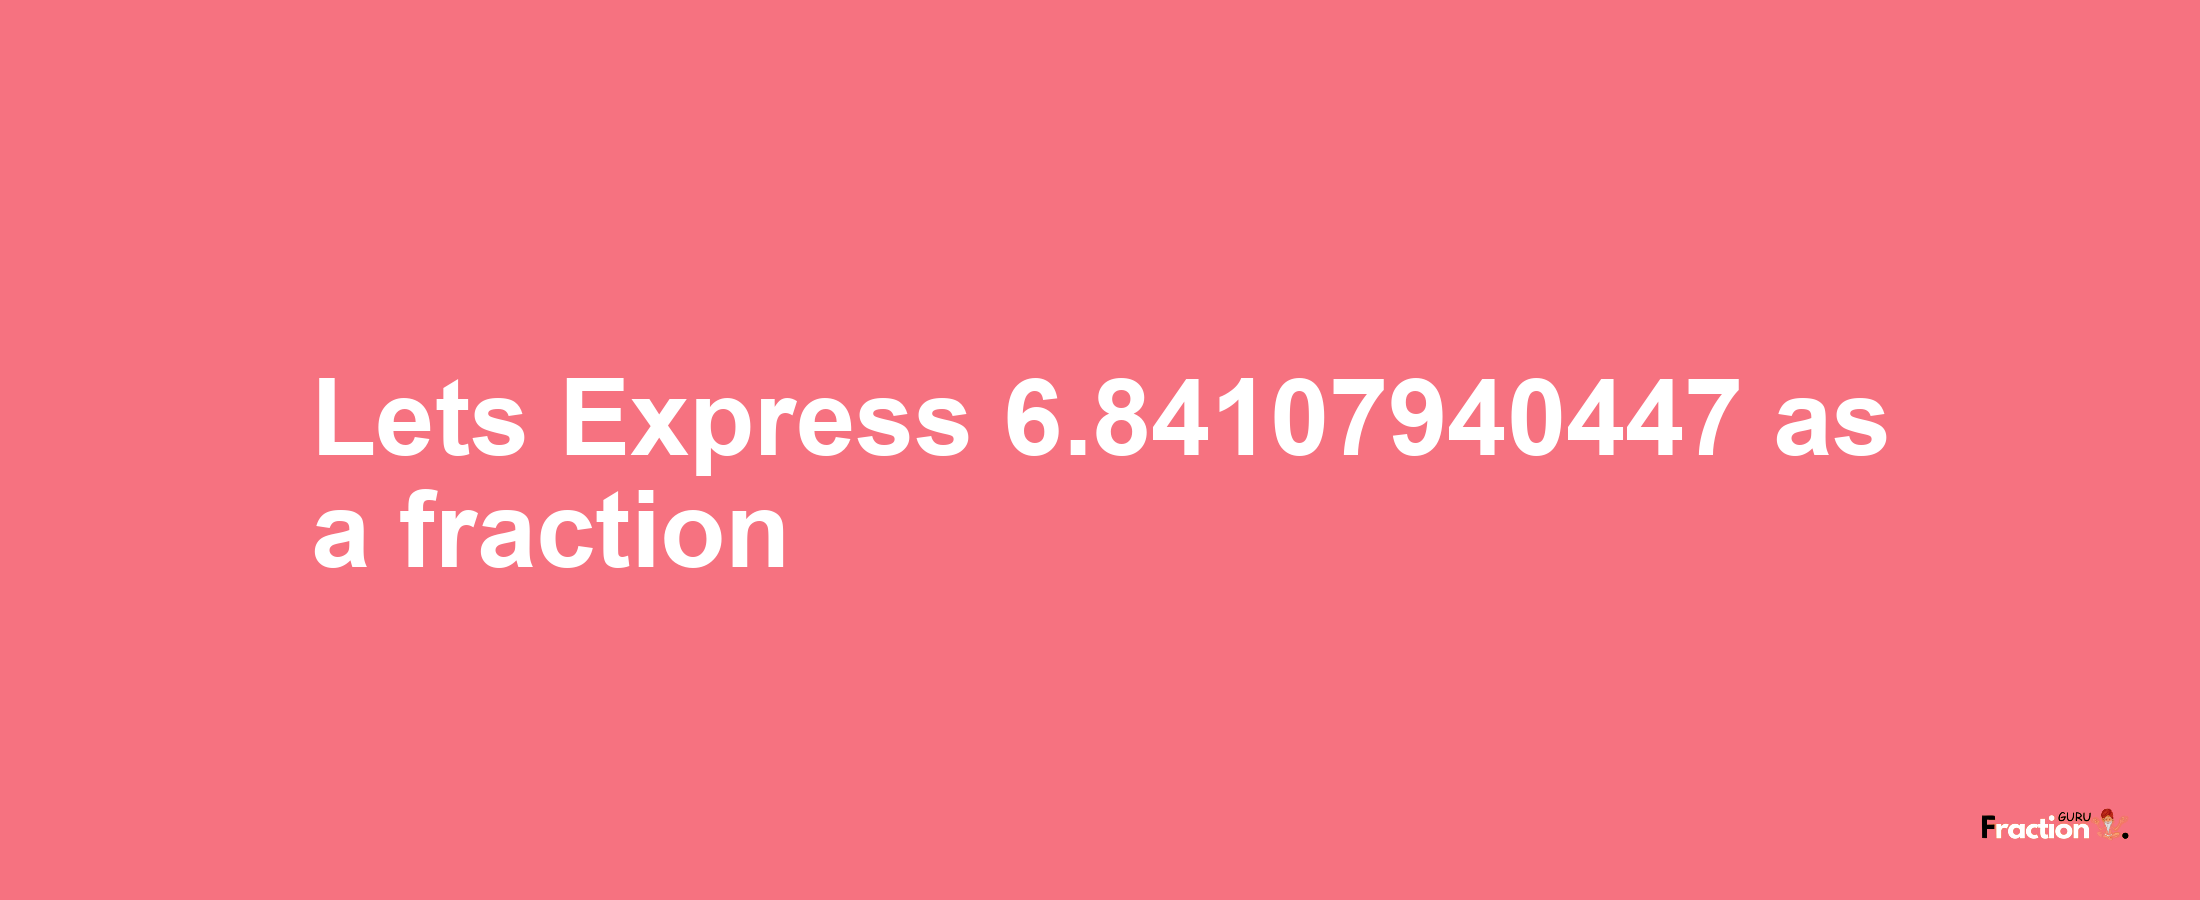 Lets Express 6.84107940447 as afraction